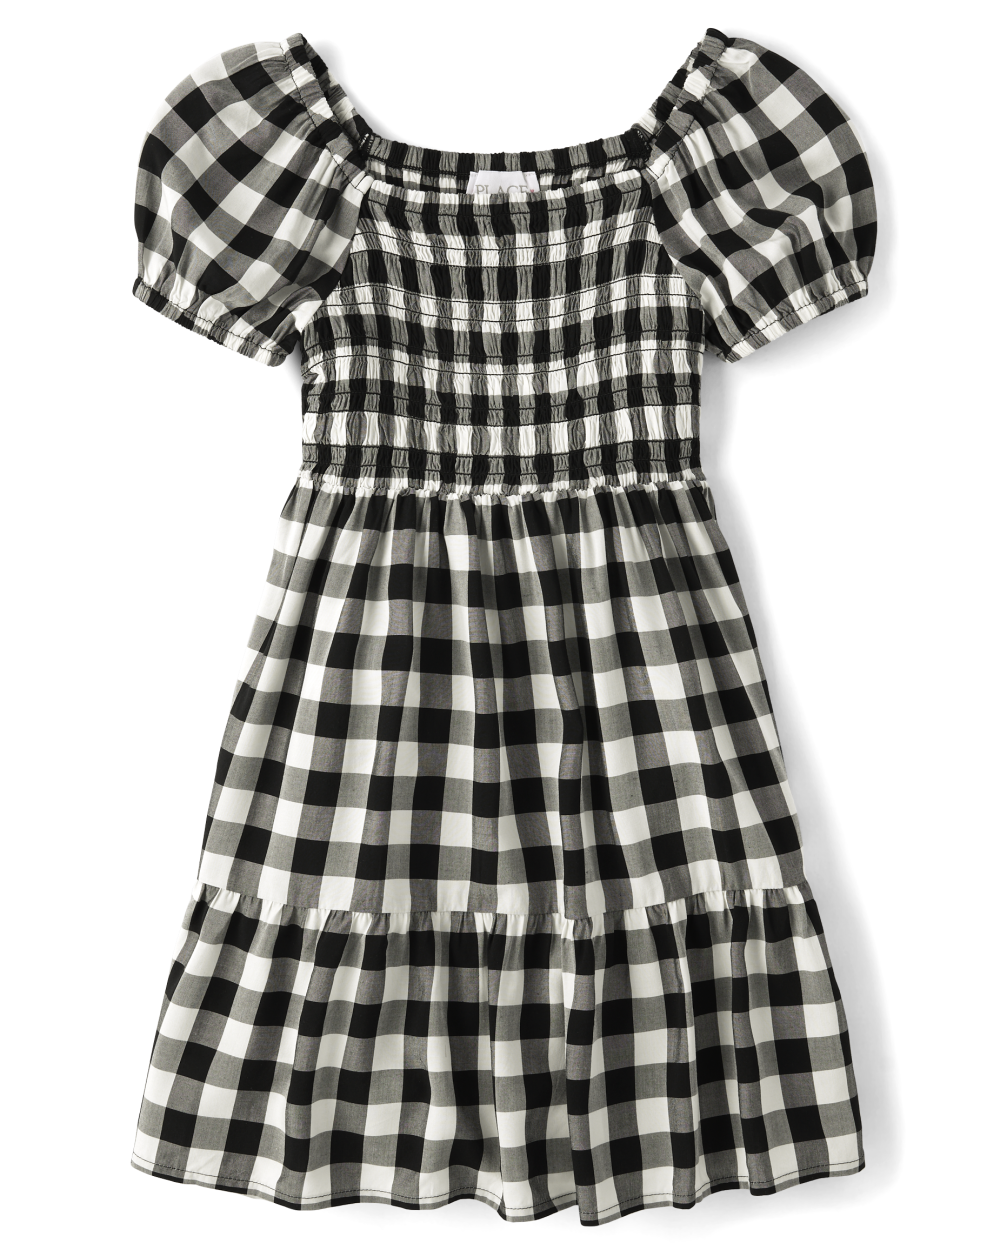 Girls Above the Knee Smocked Square Neck Rayon Checkered Gingham Print Puff Sleeves Short Sleeves Sleeves Dress With Ruffles